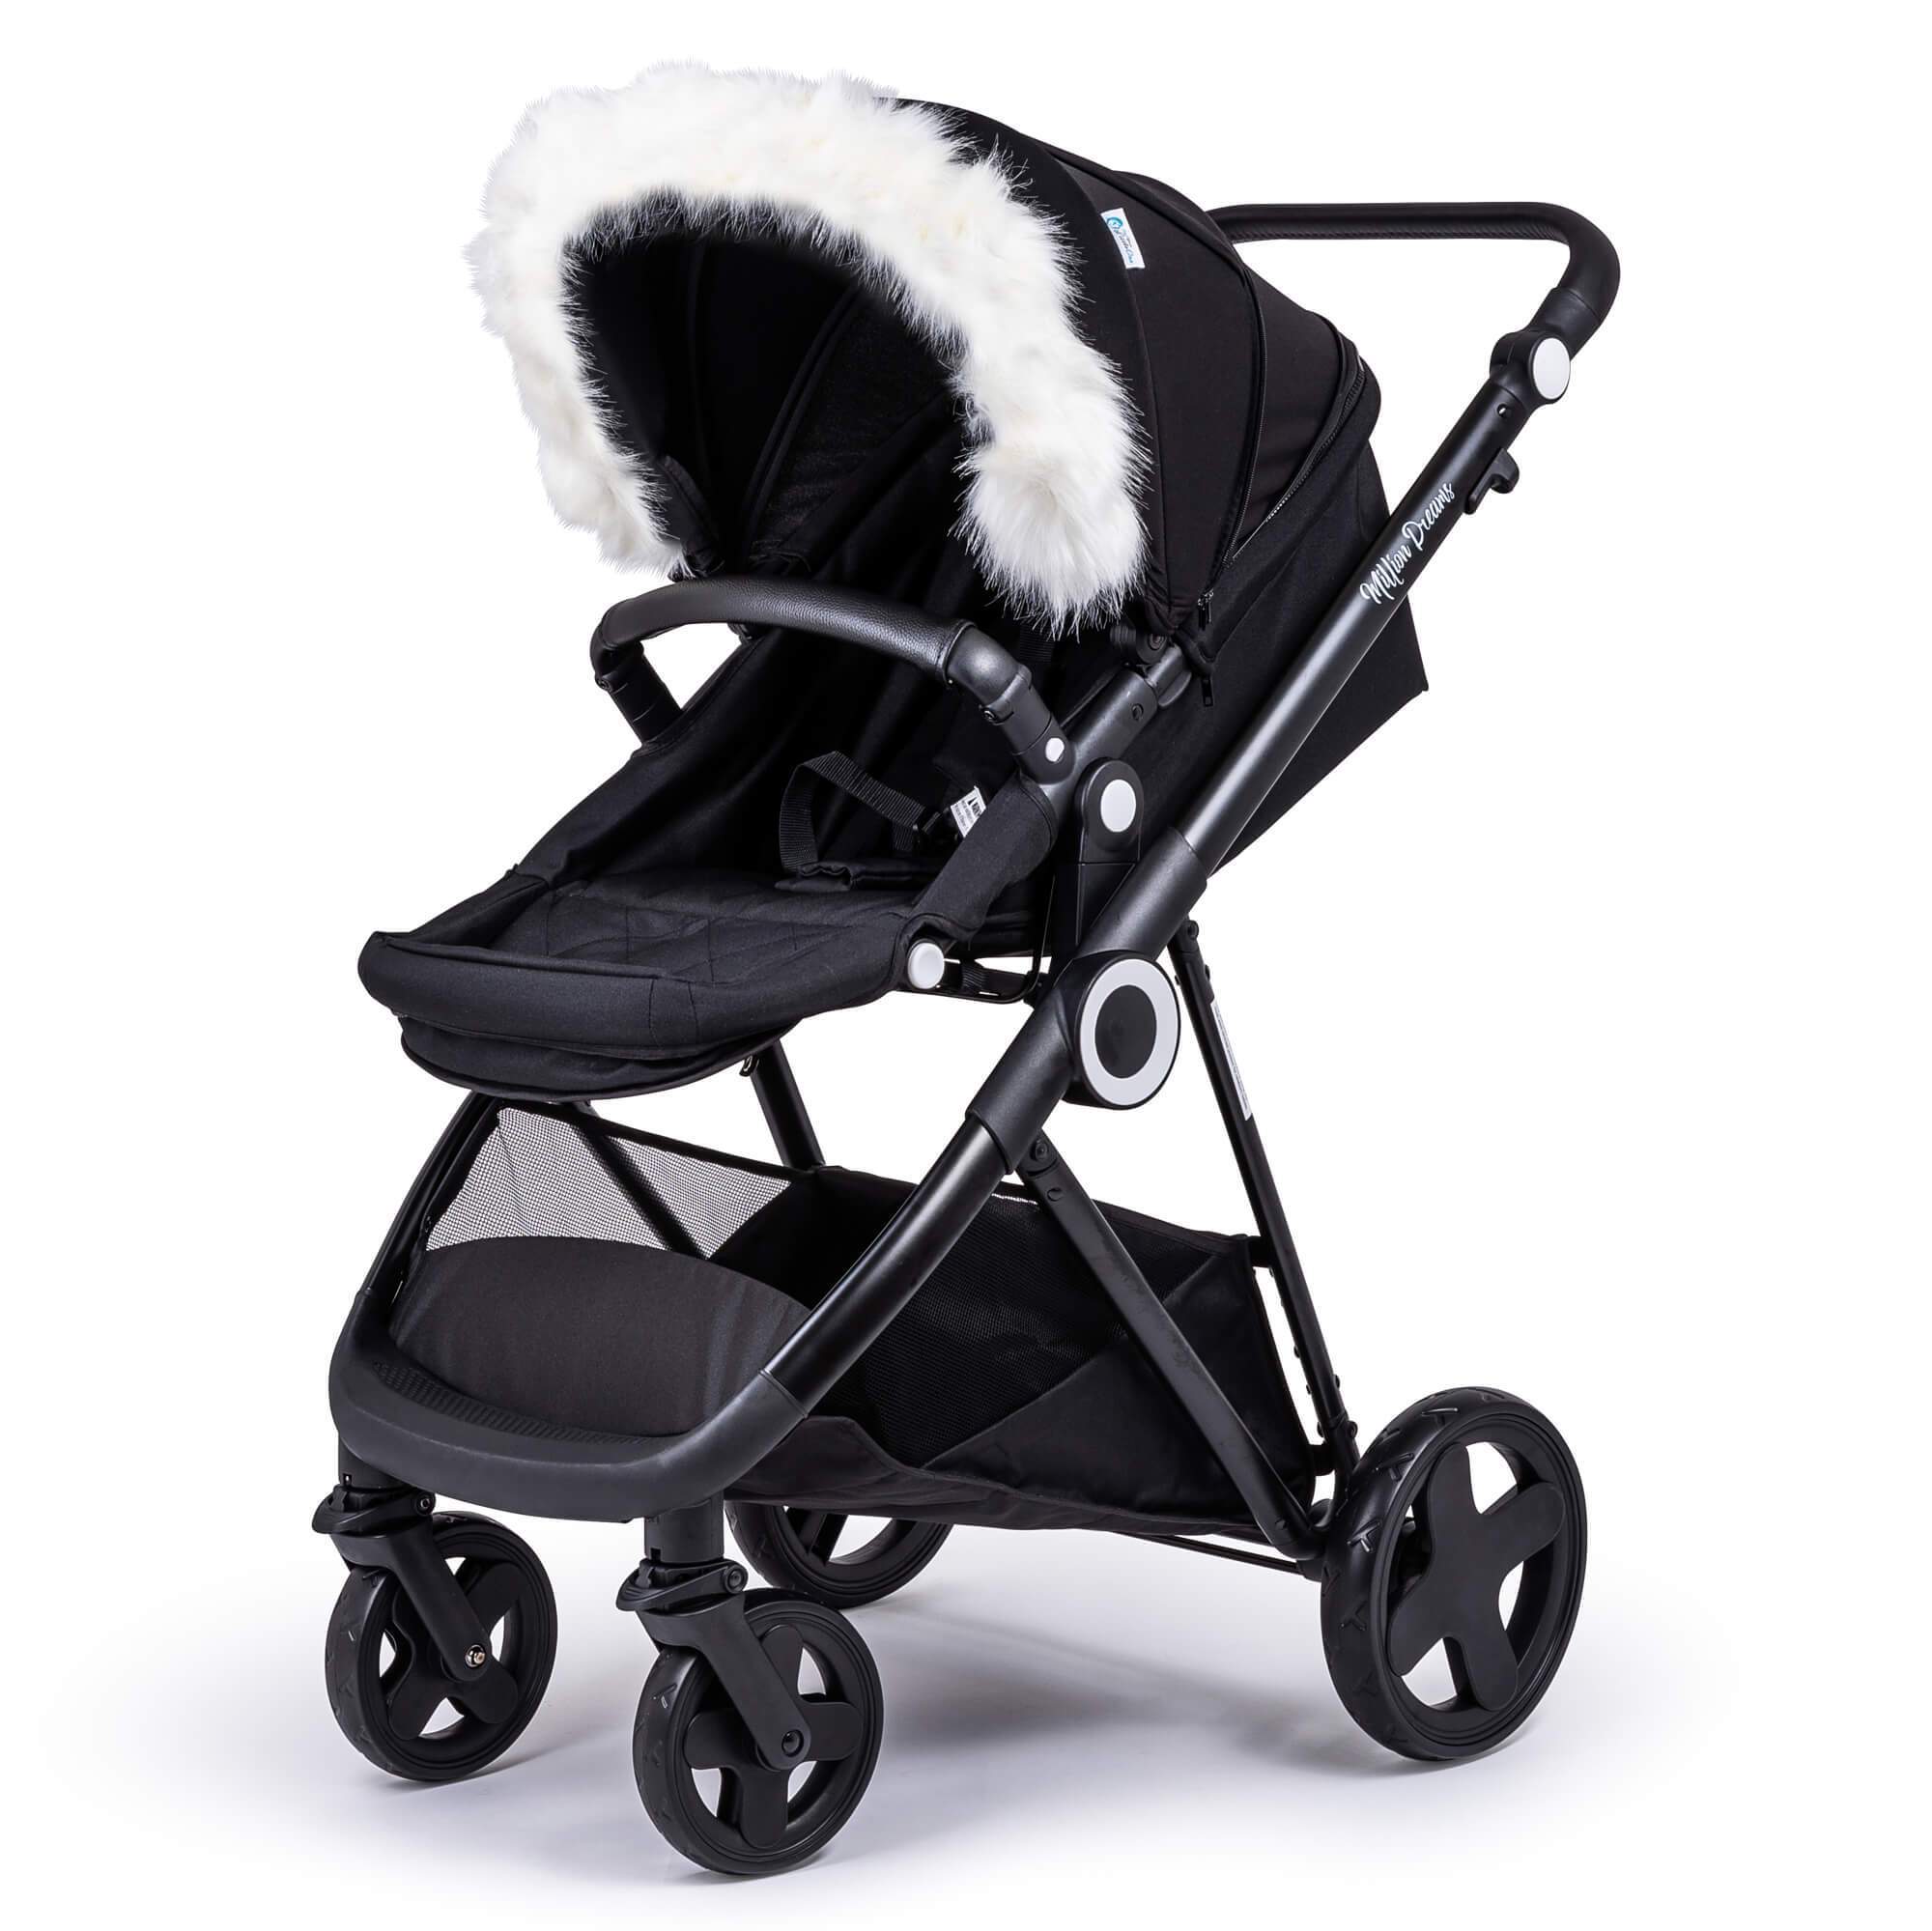 Pram Fur Hood Trim Attachment For Pushchair Compatible with Gb - White / Fits All Models | For Your Little One